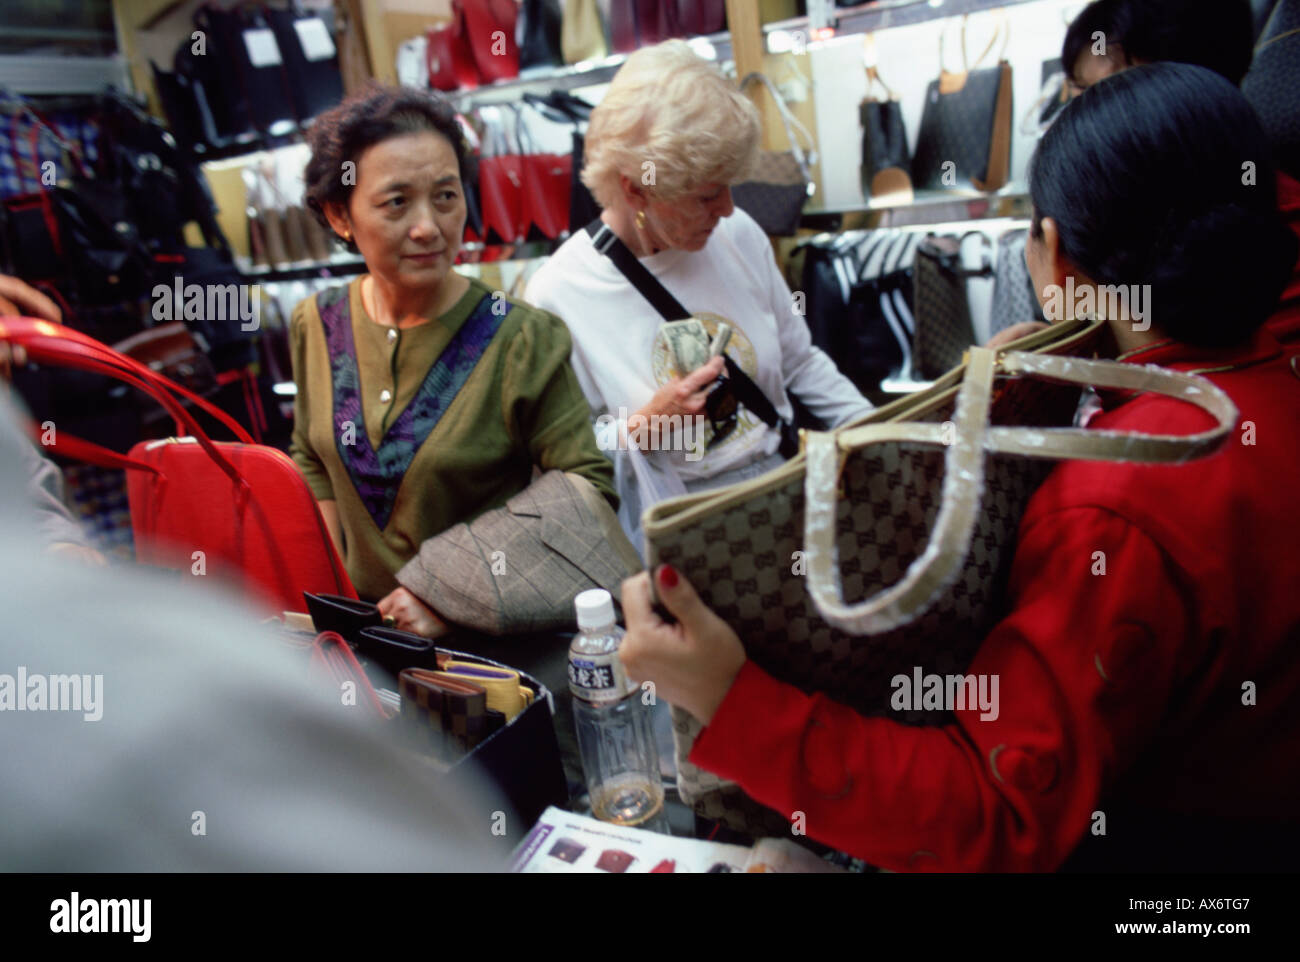 Who is buying China's luxury fakes?